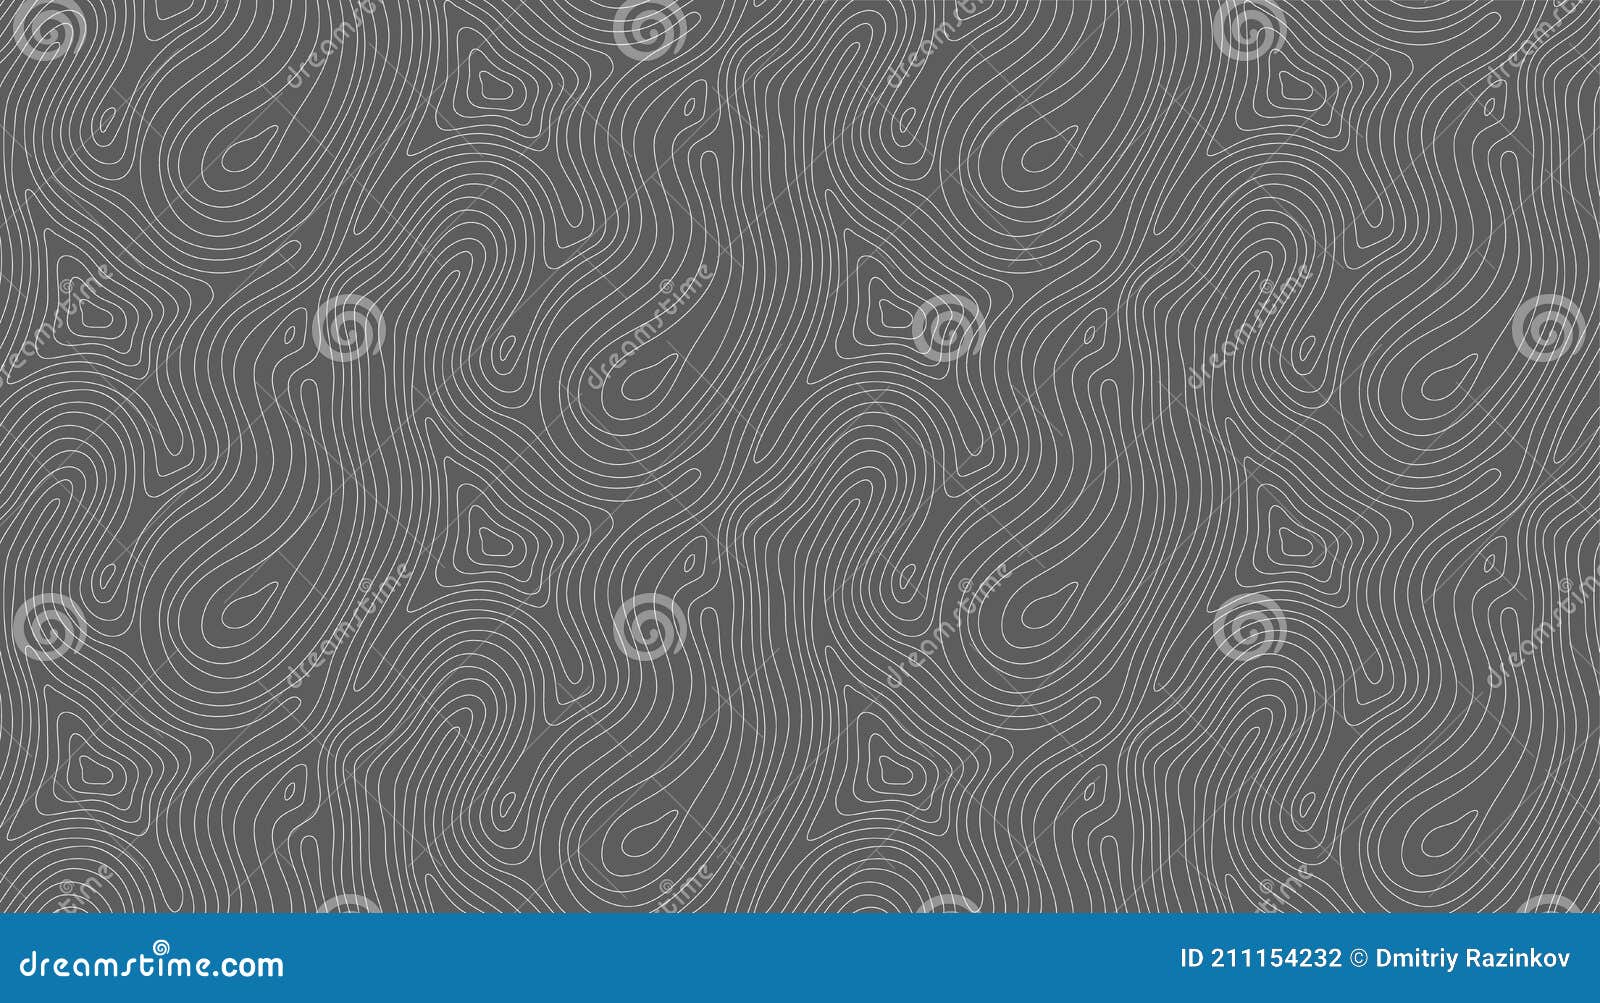 seamless  topographic map background white on dark. line topography map seamless pattern. mountain hiking trail